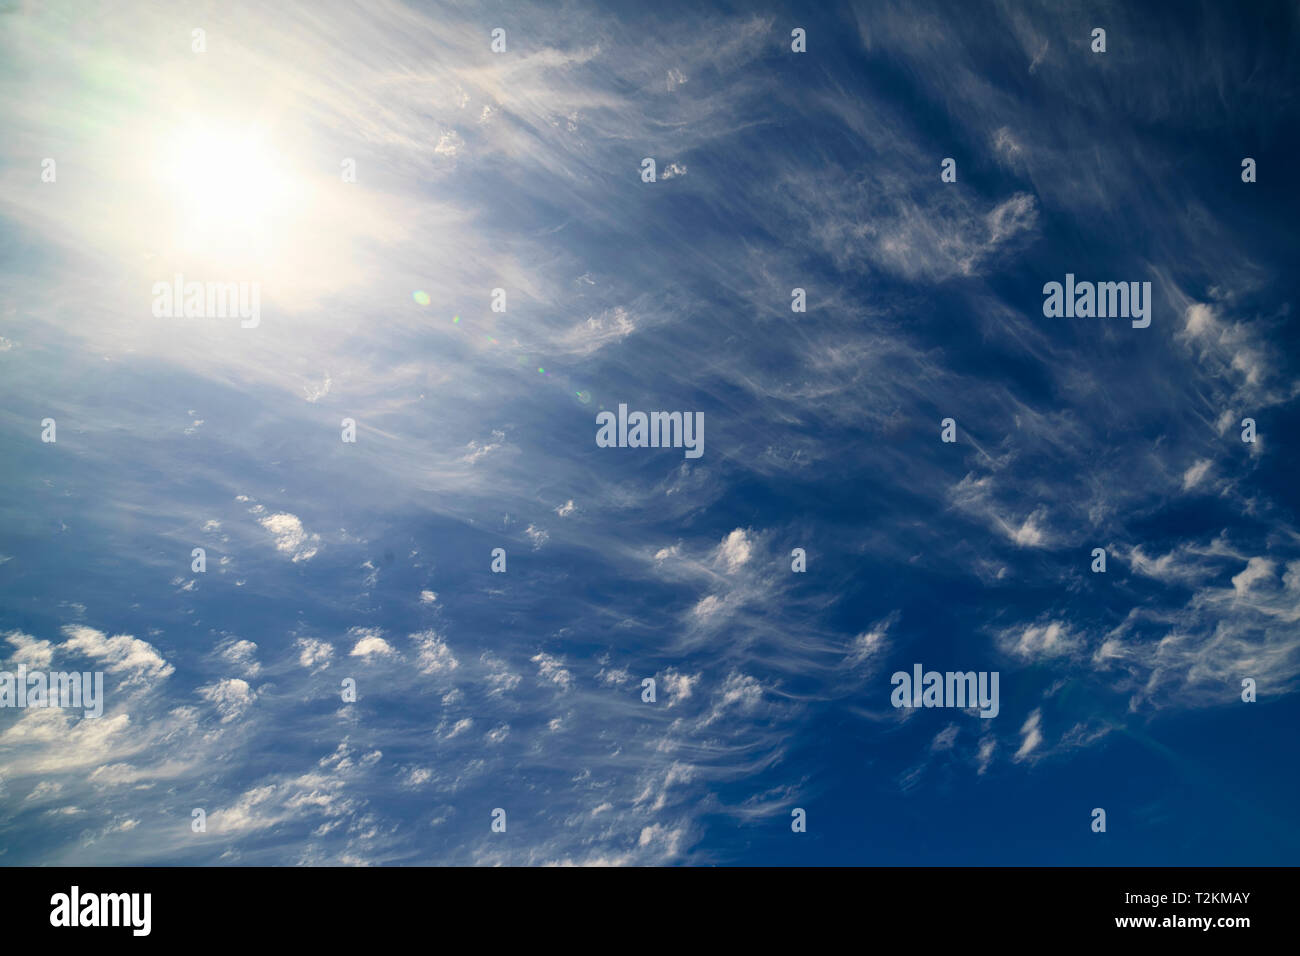 The combination of sun, blue sky, and wispy clouds make for interesting patterns. Stock Photo